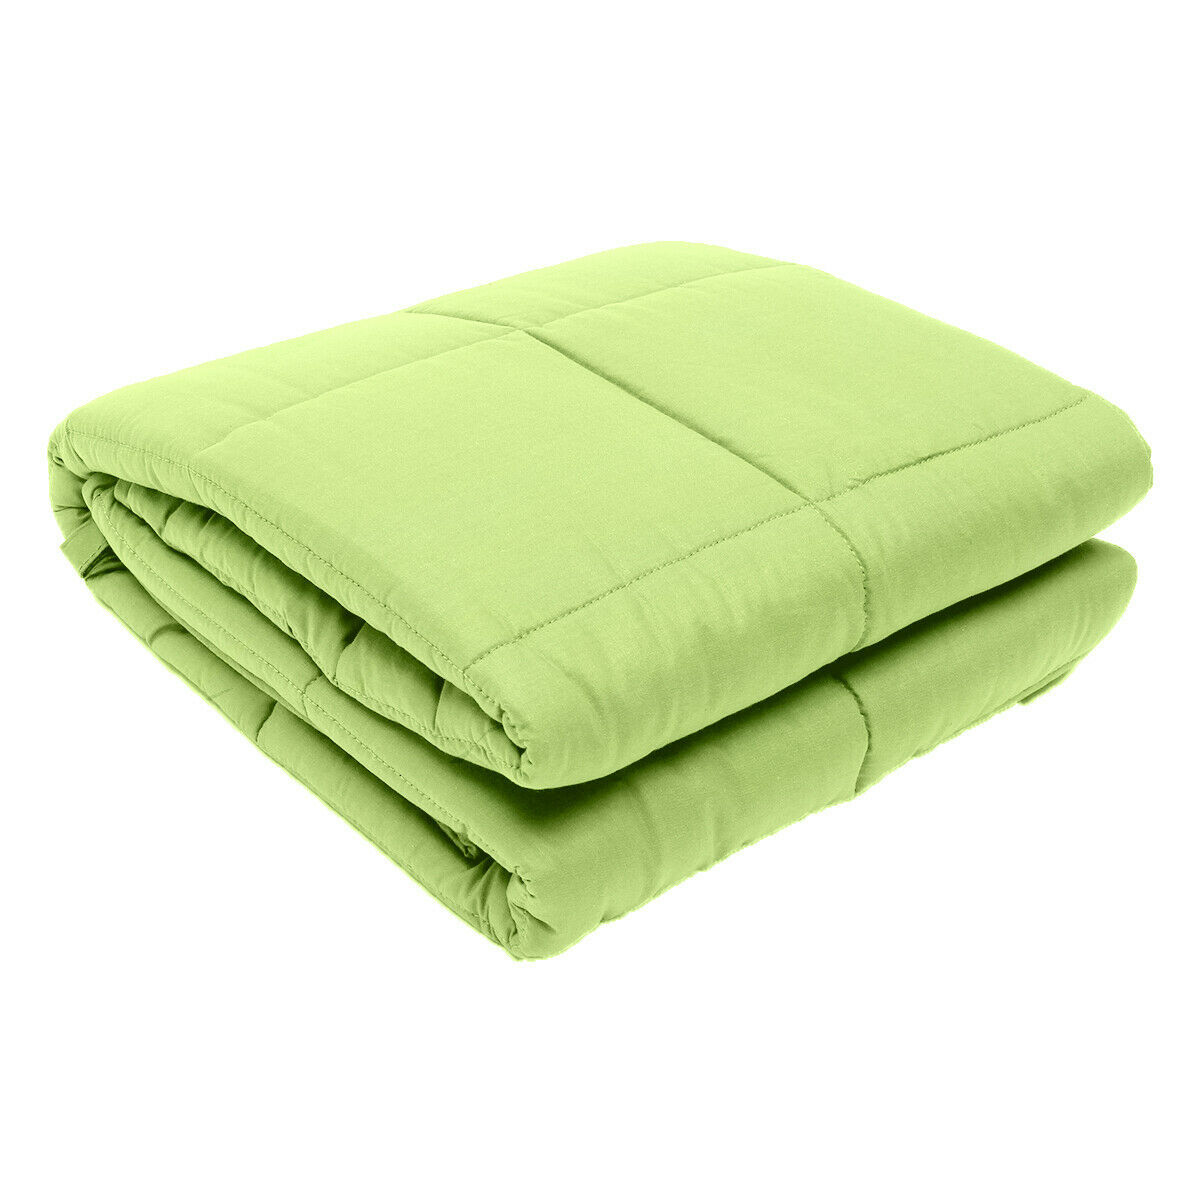 Ultra Soft GREEN Weighted Heavy Blanket 15/20lbs 60"x80" for Kids Teens